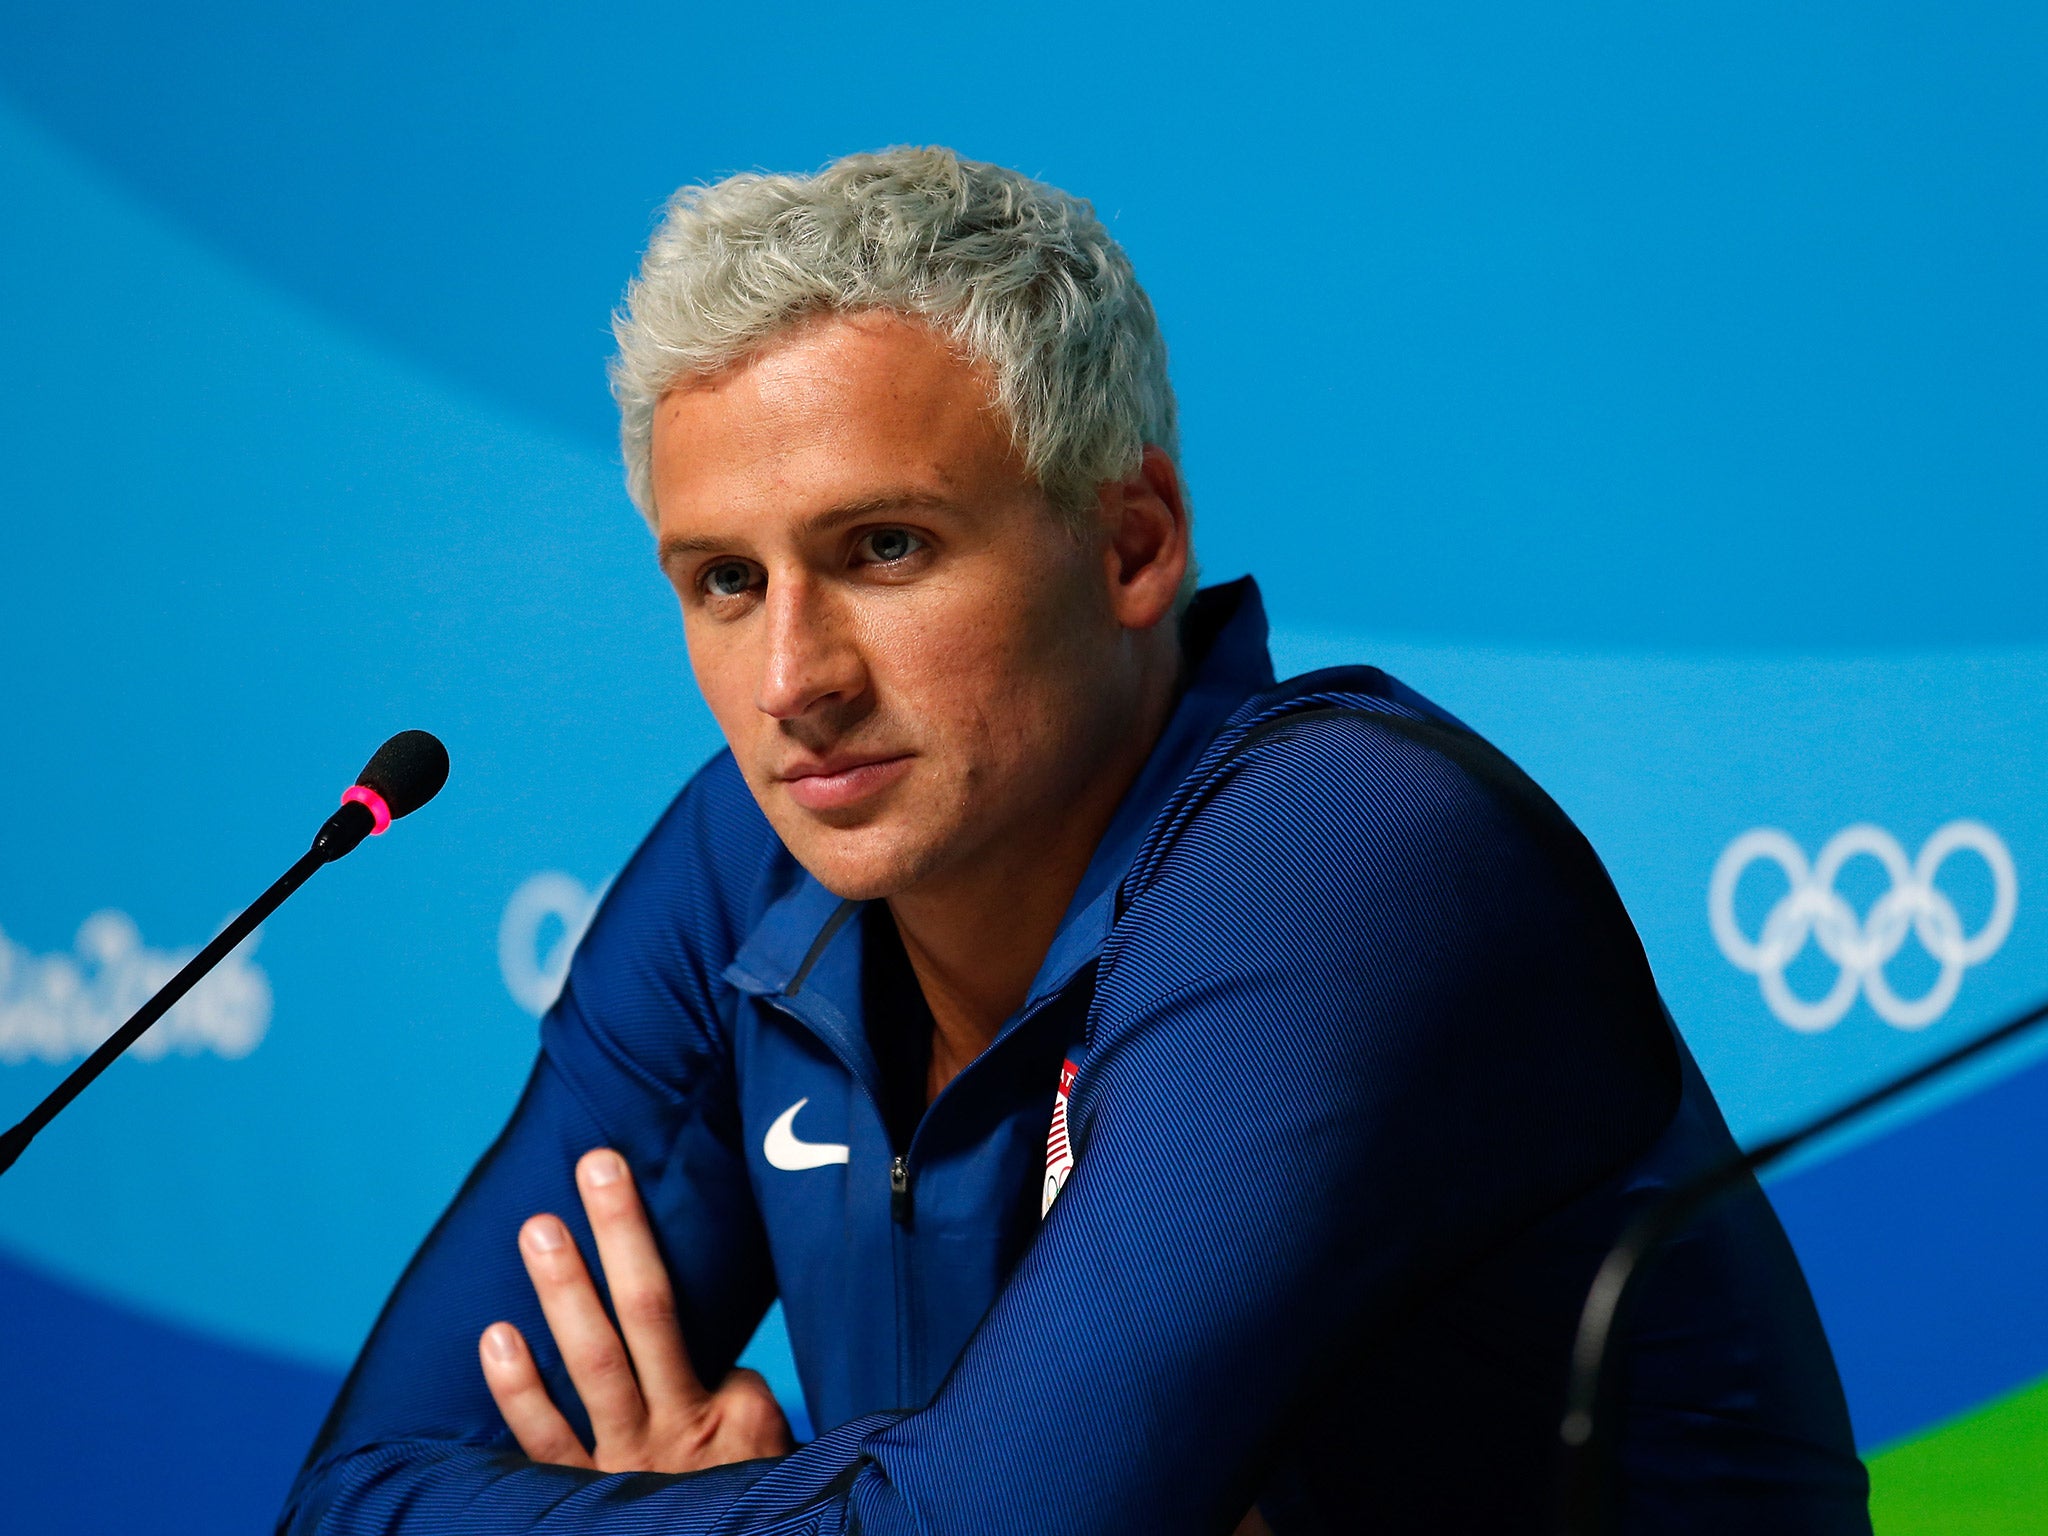 Ryan Lochte told US media that he and three teammates were the victims of an armed robbery